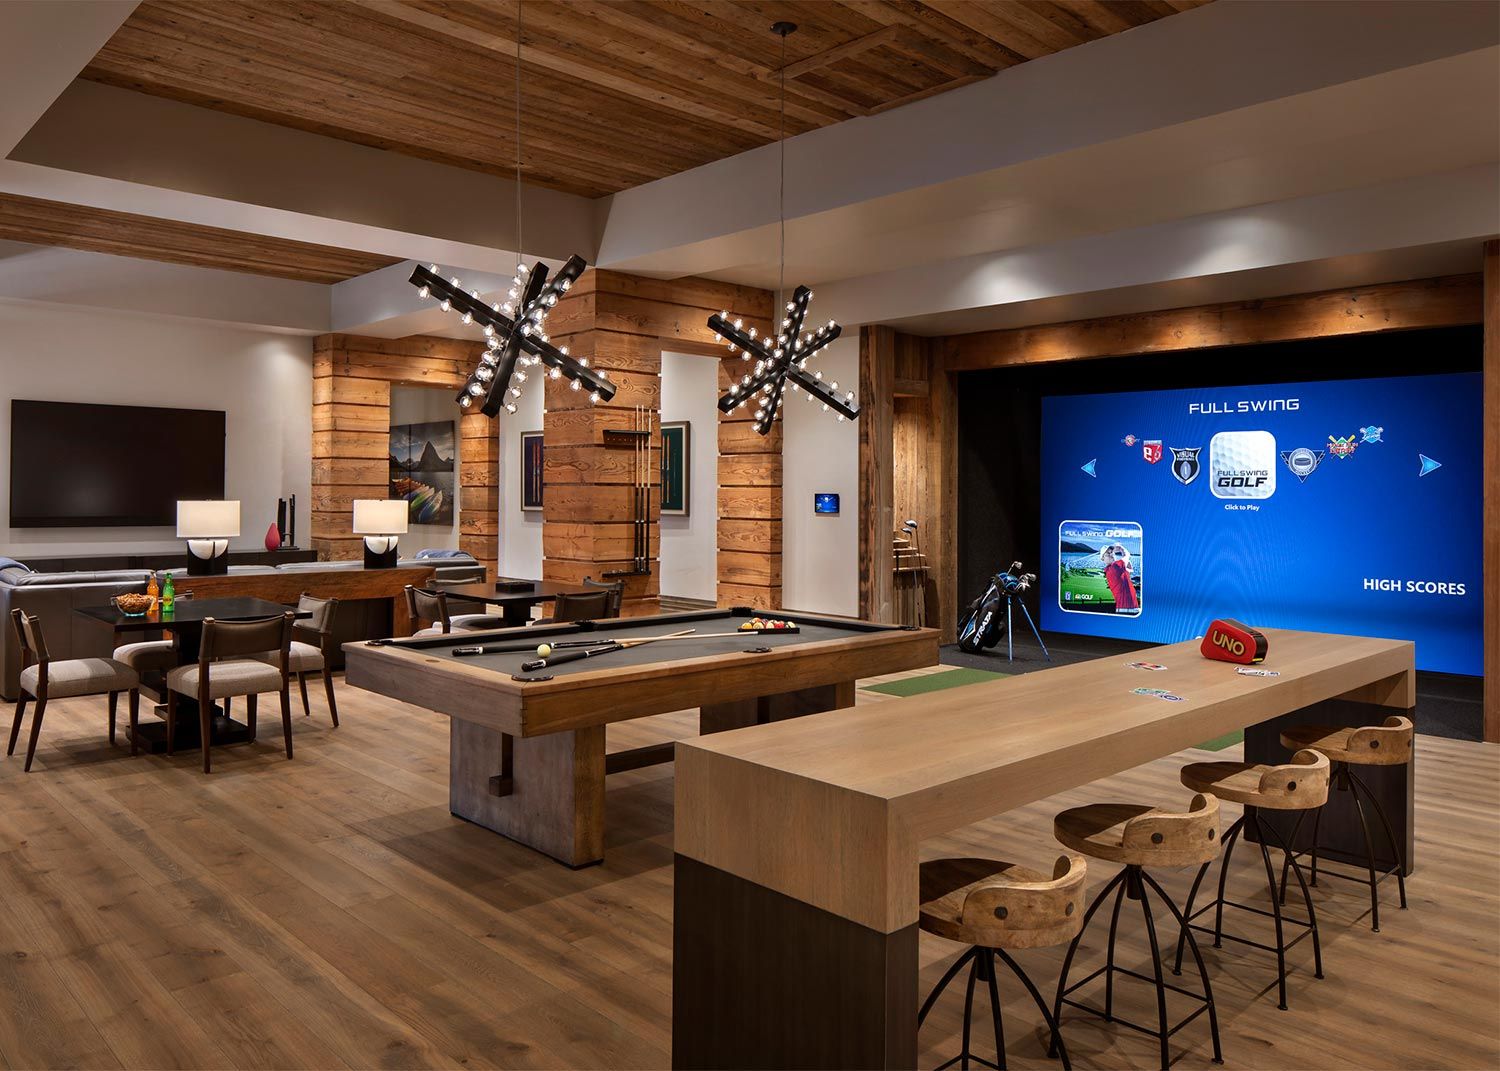 Game room in wood colors with a Golf Simulator, a pool and a ping pong table